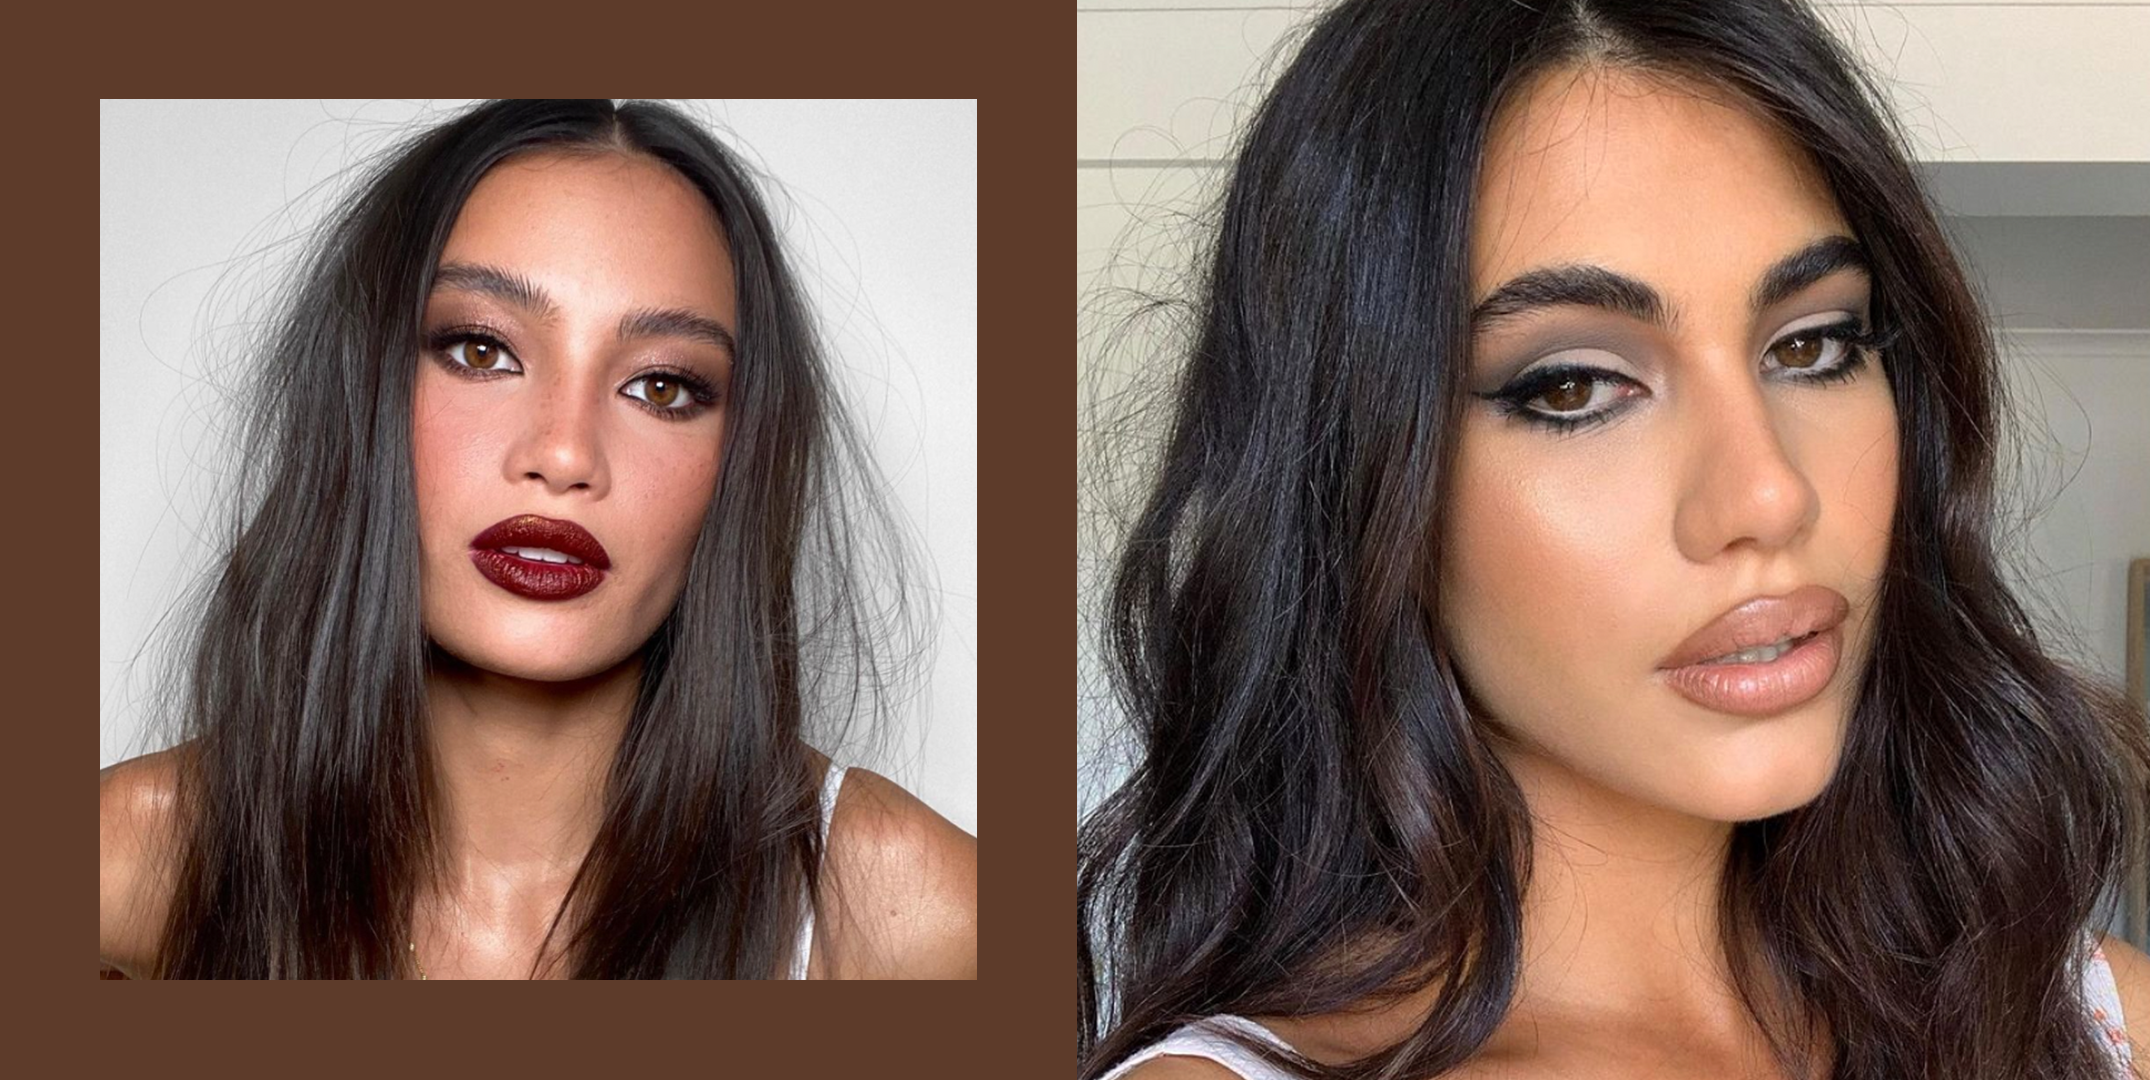 35 Grunge Makeup Ideas for a Bold and Edgy Look